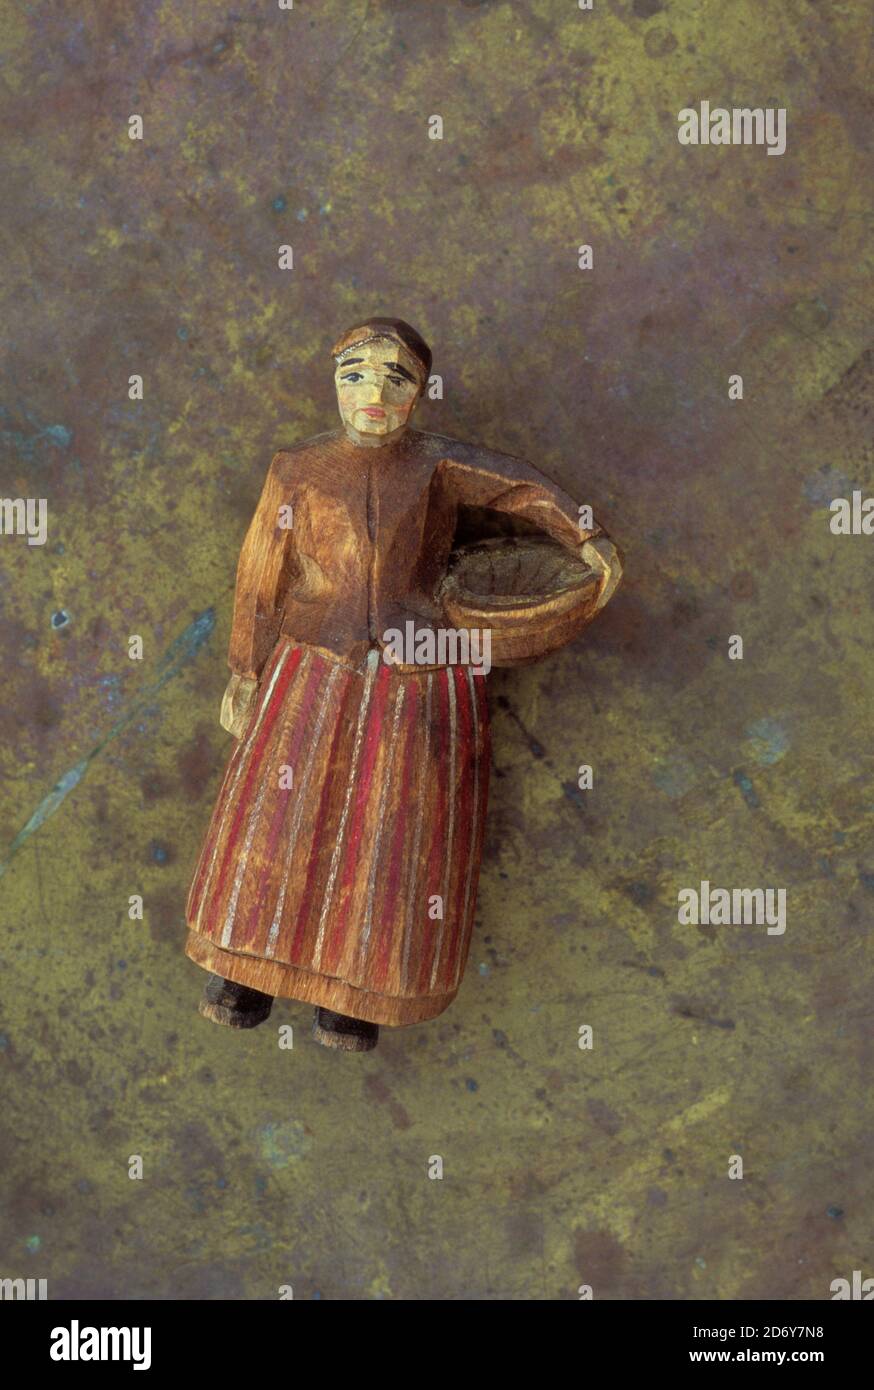 Vintage naive carved and painted wooden model of farm woman in long skirt holding bowl for feeding chickens or sowing seeds Stock Photo